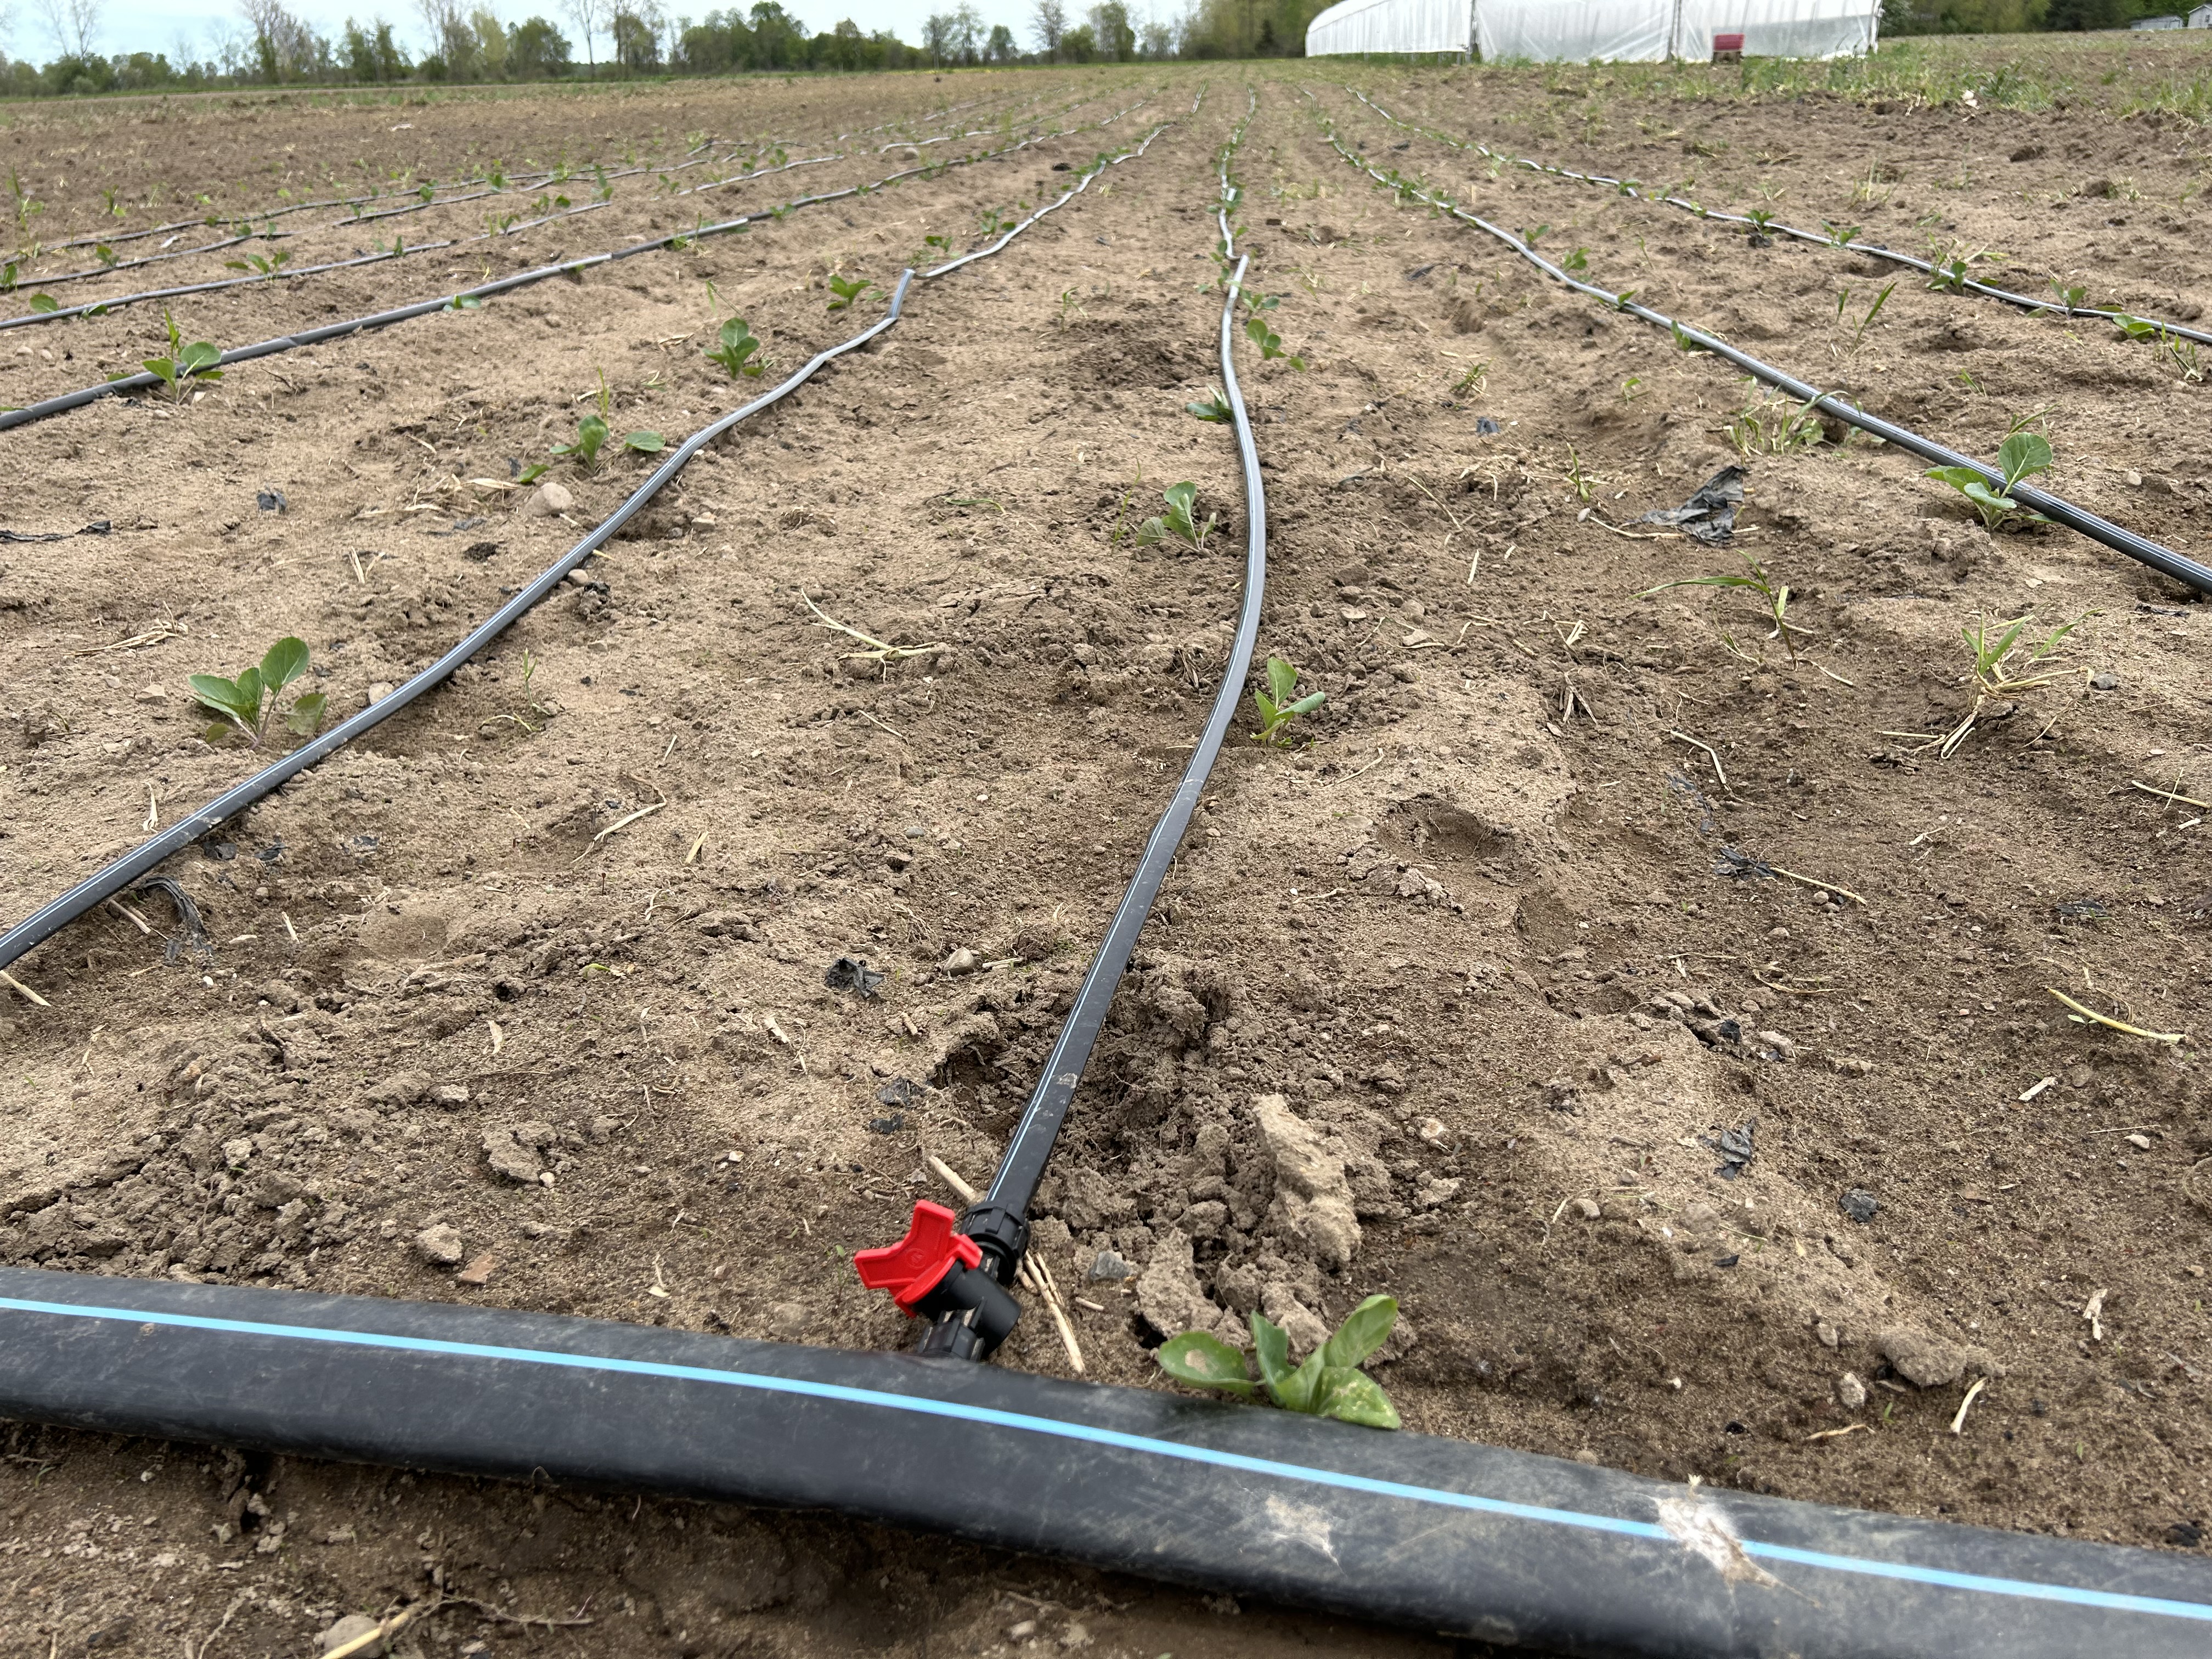 Irrigation pipes in cabbage field.